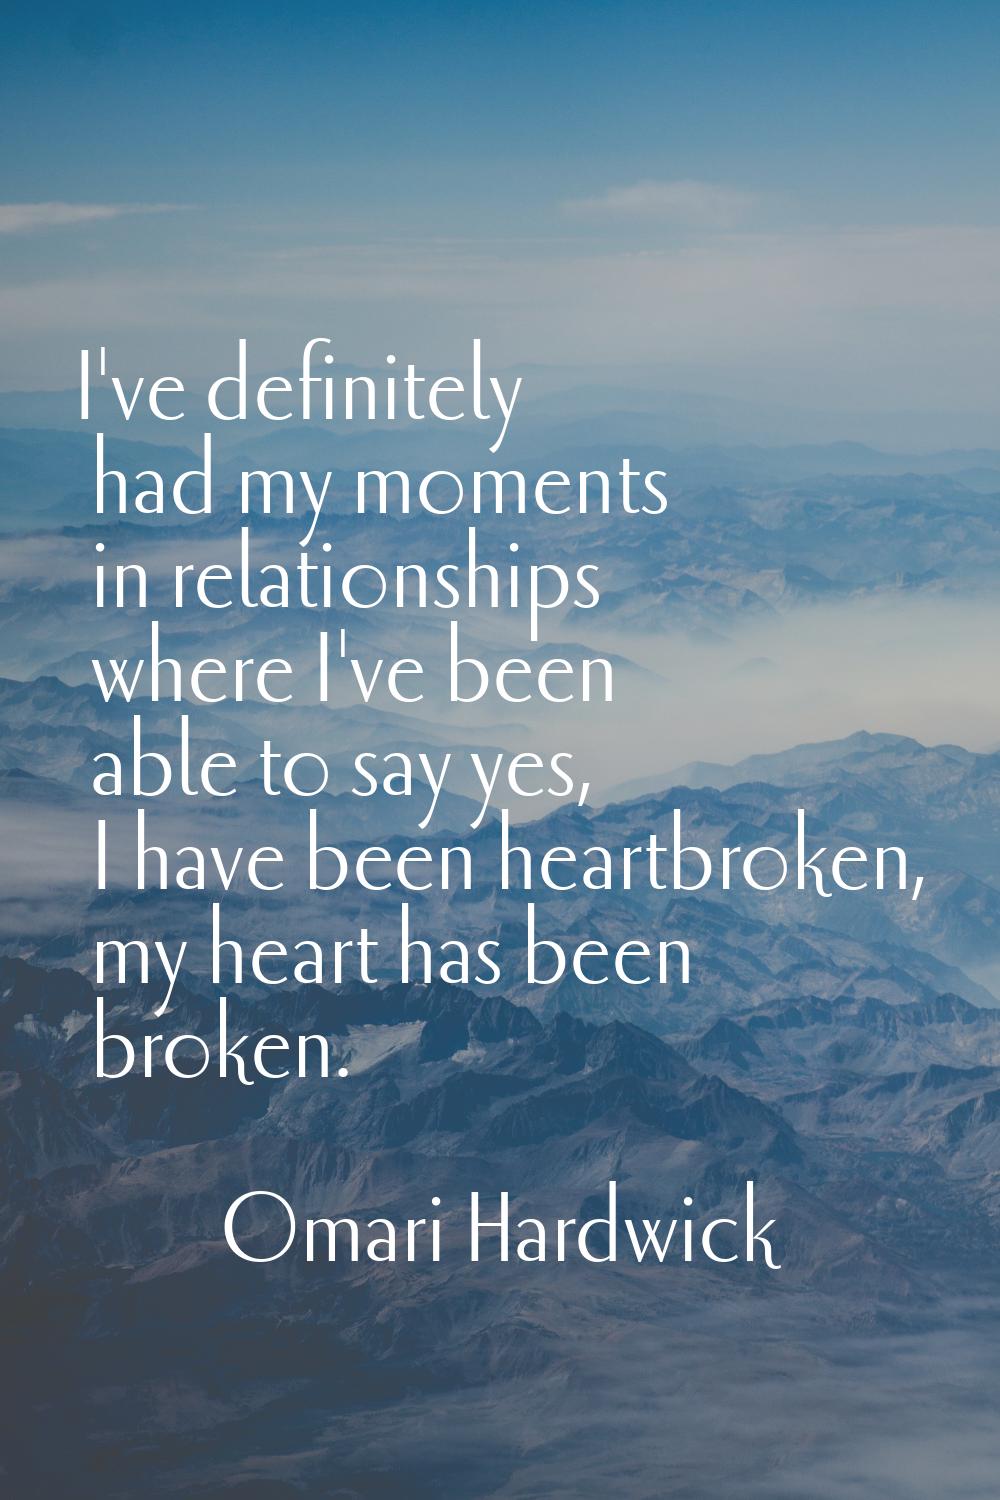 I've definitely had my moments in relationships where I've been able to say yes, I have been heartb